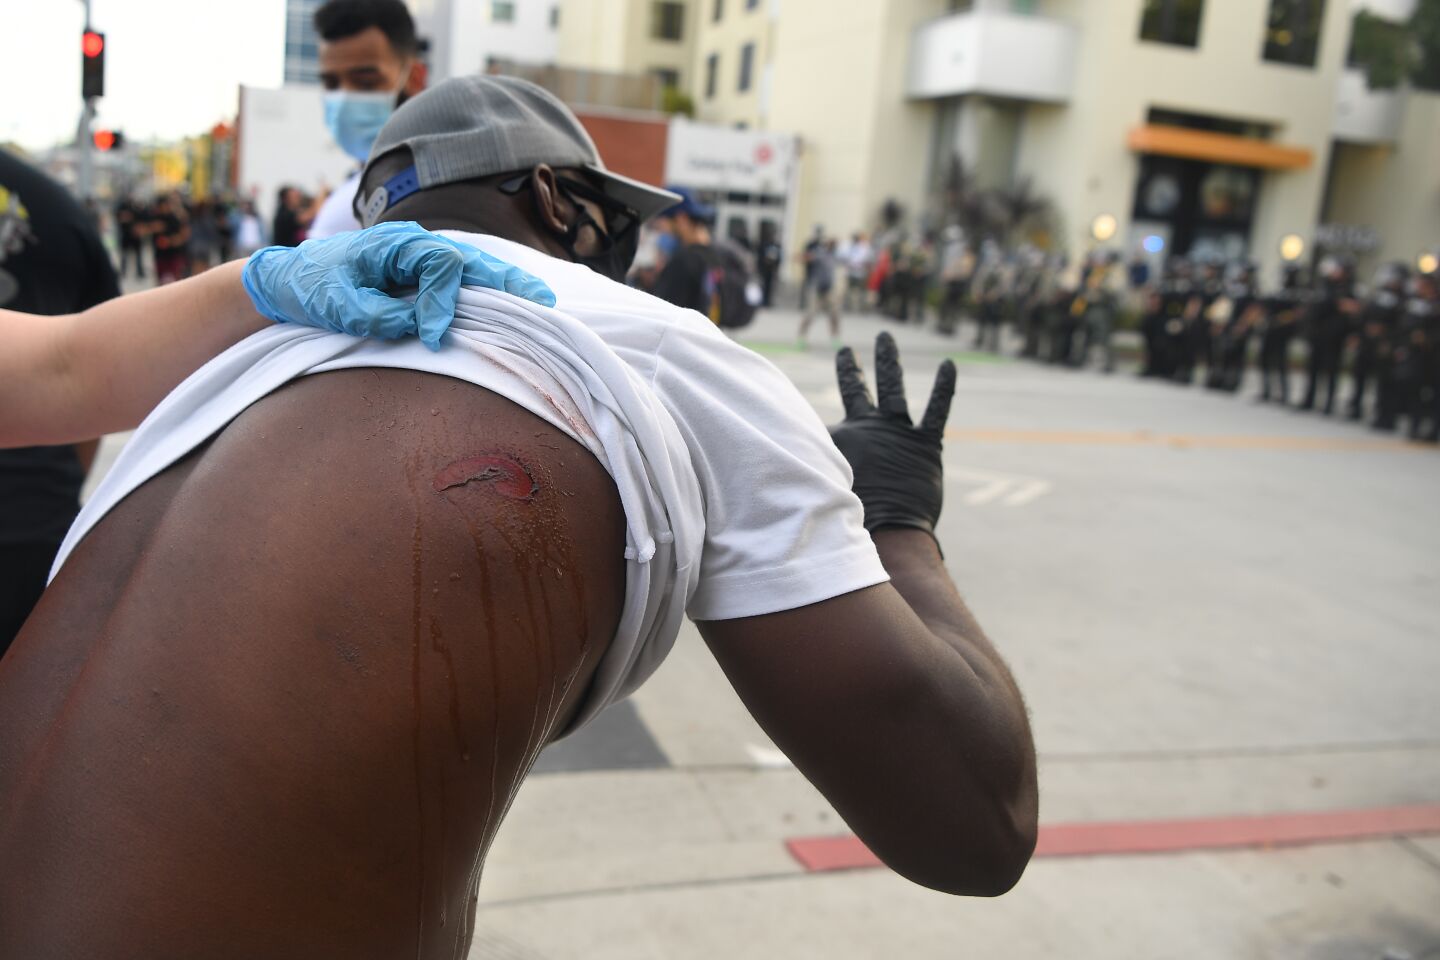 A protester is treated after being struck by a rubber bullet.